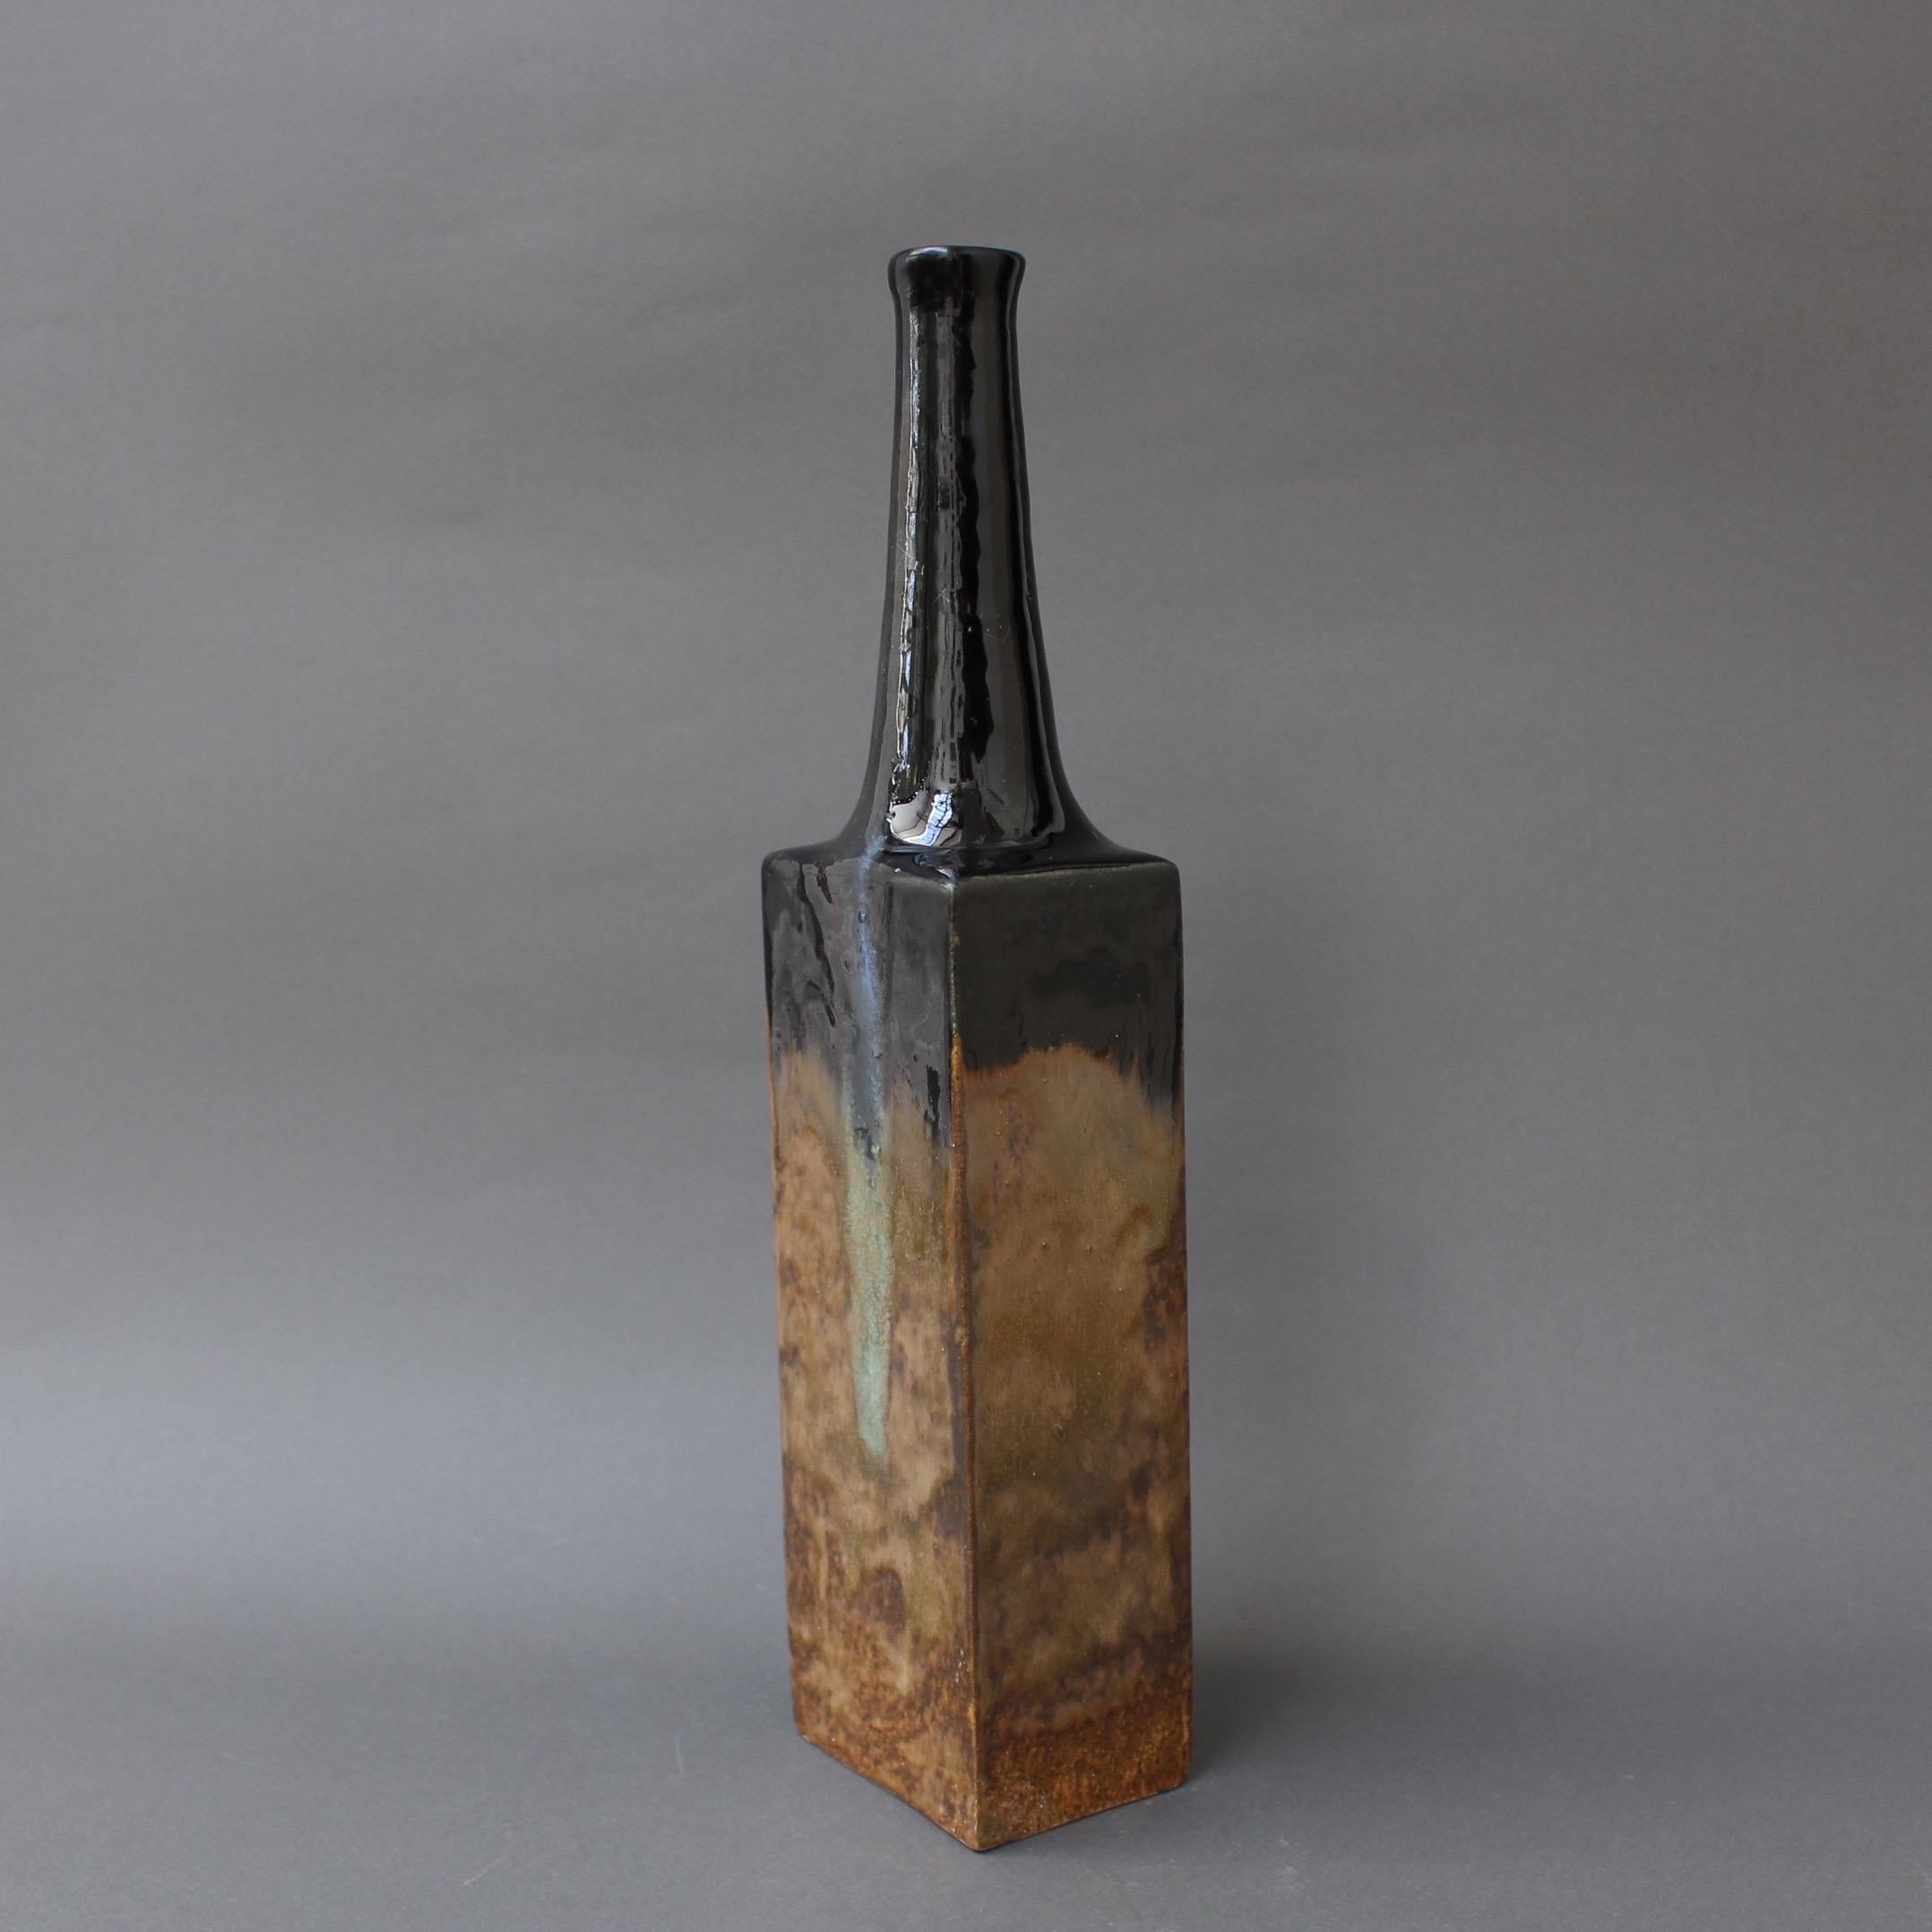 Black and Chocolate Brown Ceramic Bottle-Shaped Vase by Bruno Gambone, c. 1980s In Good Condition For Sale In London, GB